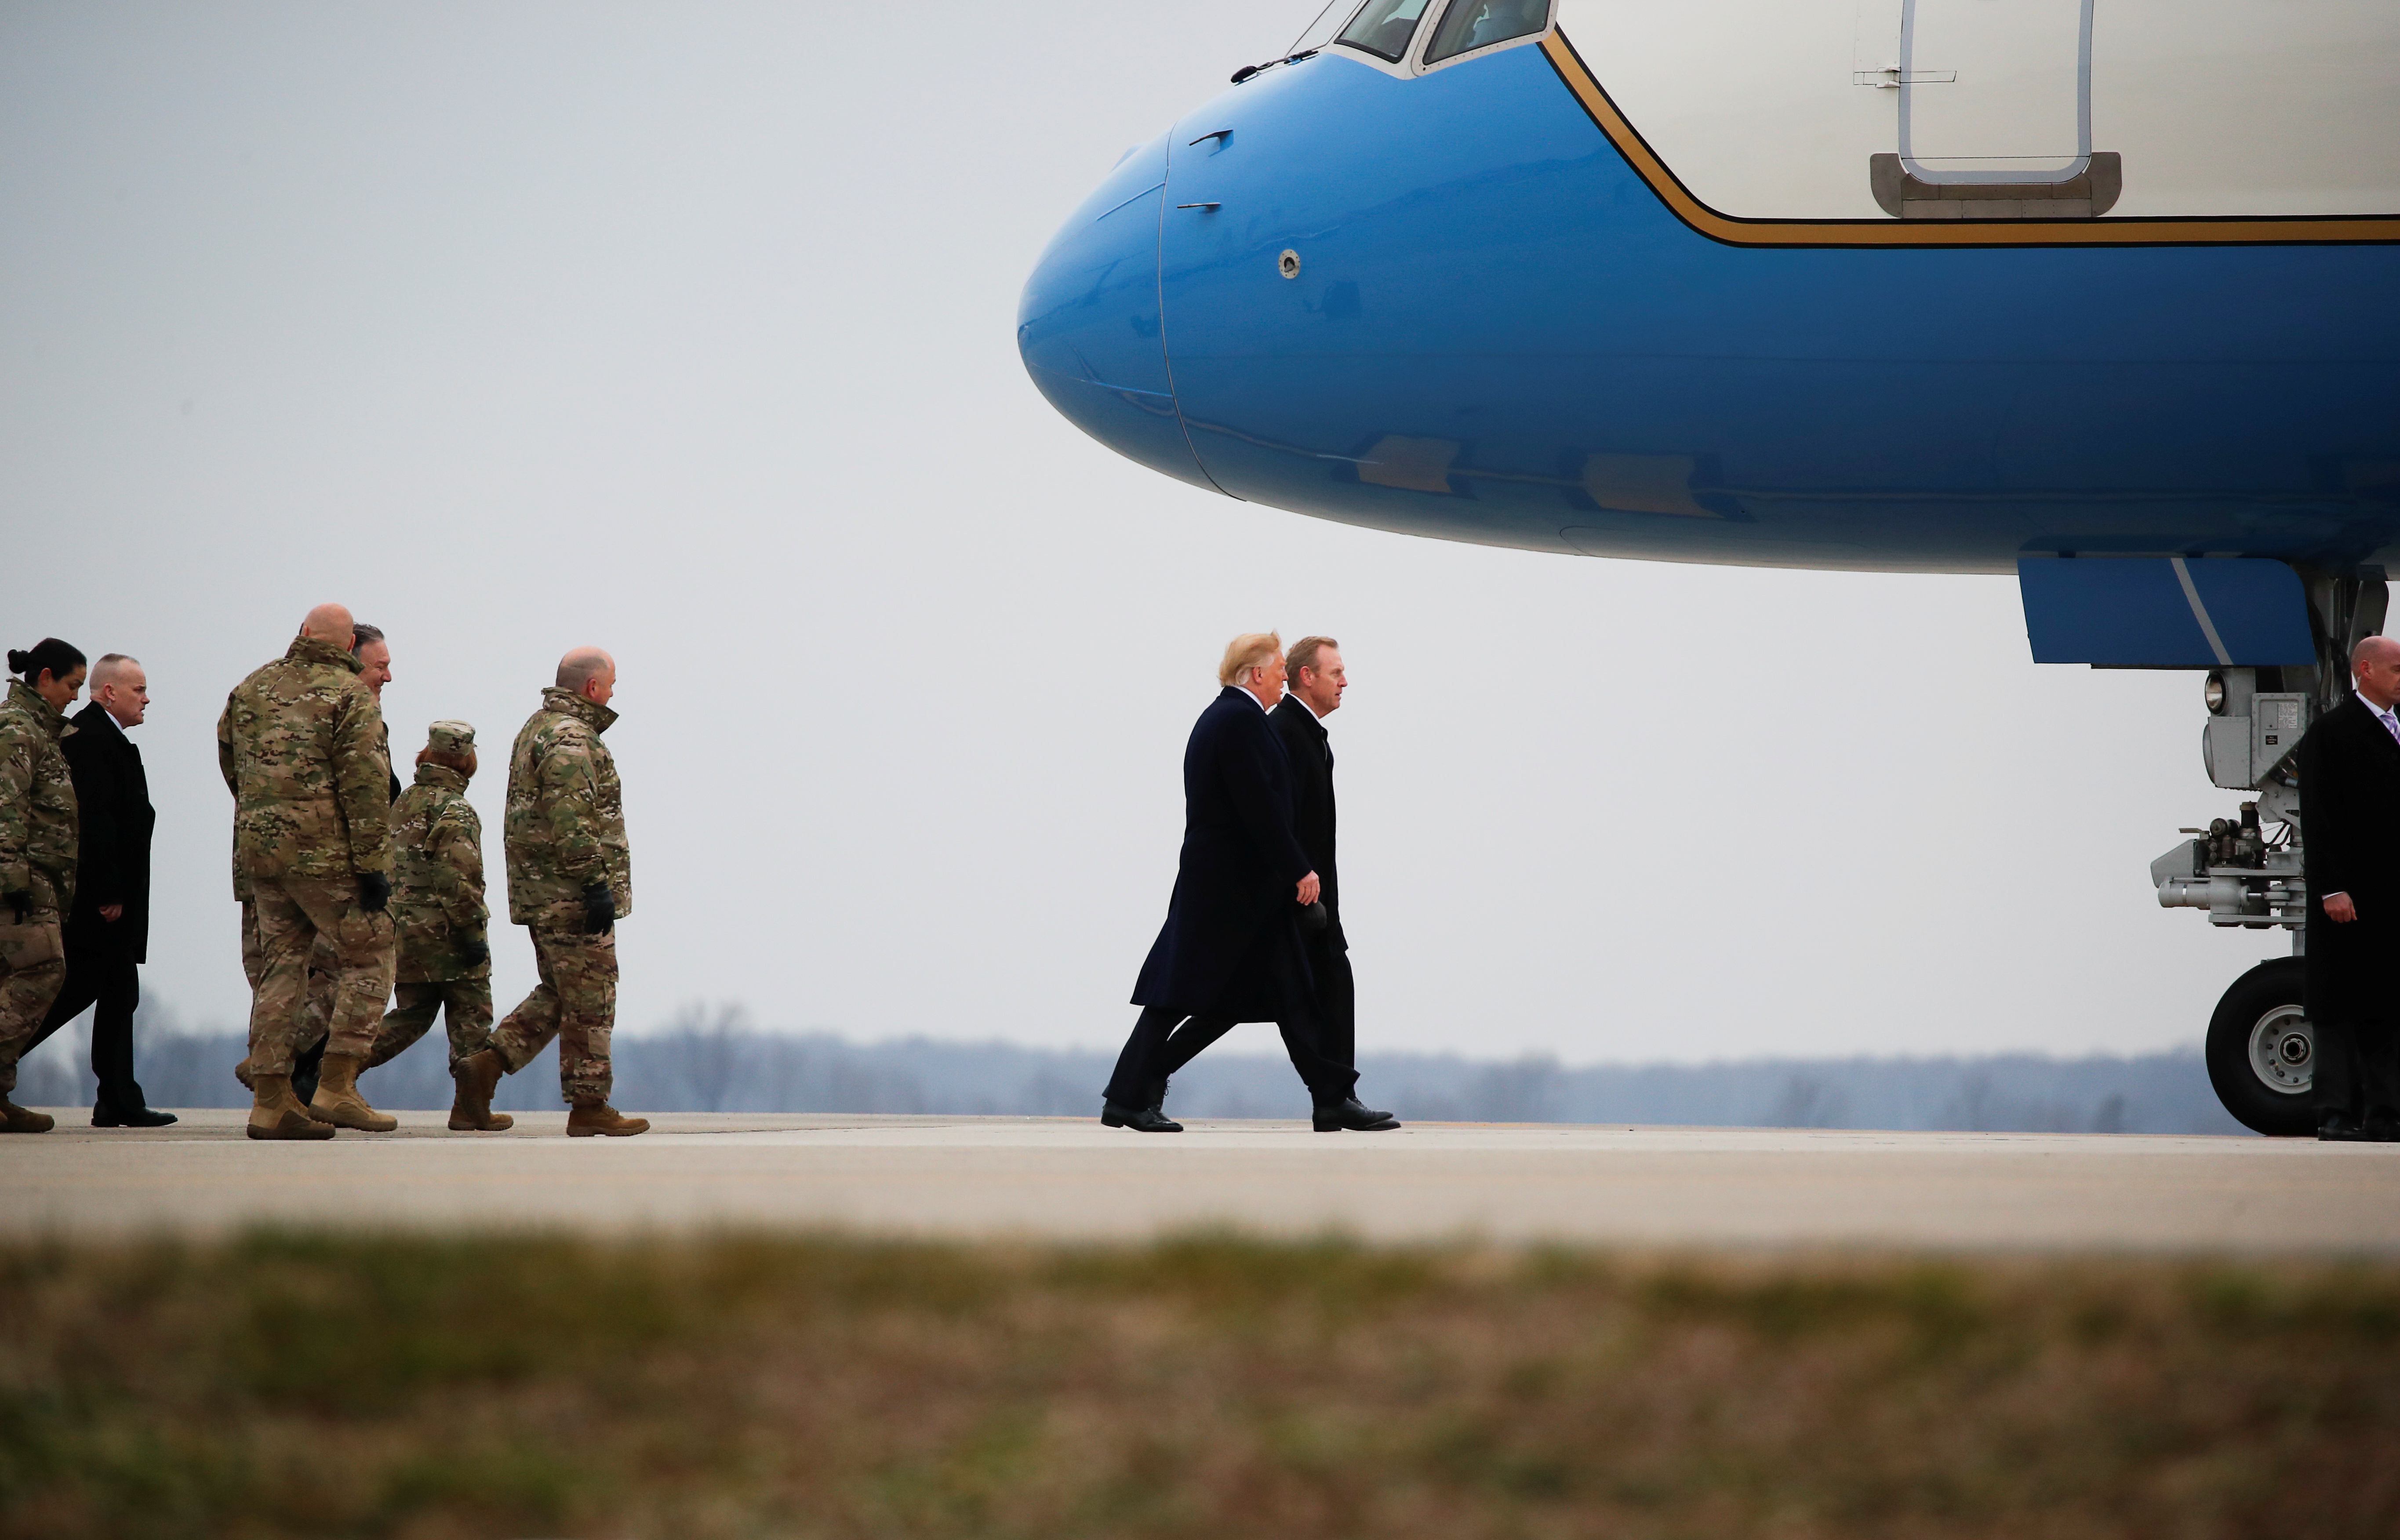 U.S. President Donald Trump walks back to Air Force One with acting Secretary of Defnese Patrick Shanahan after dignified transfer ceremonies for three members of the U.S. military and one civilian employee of the Defense Intelligence Agency killed during a recent attack in Syria, as they prepare to depart Dover Air Force Base, in Dover, Delaware, U.S., January 19, 2019. REUTERS/Carlos Barria